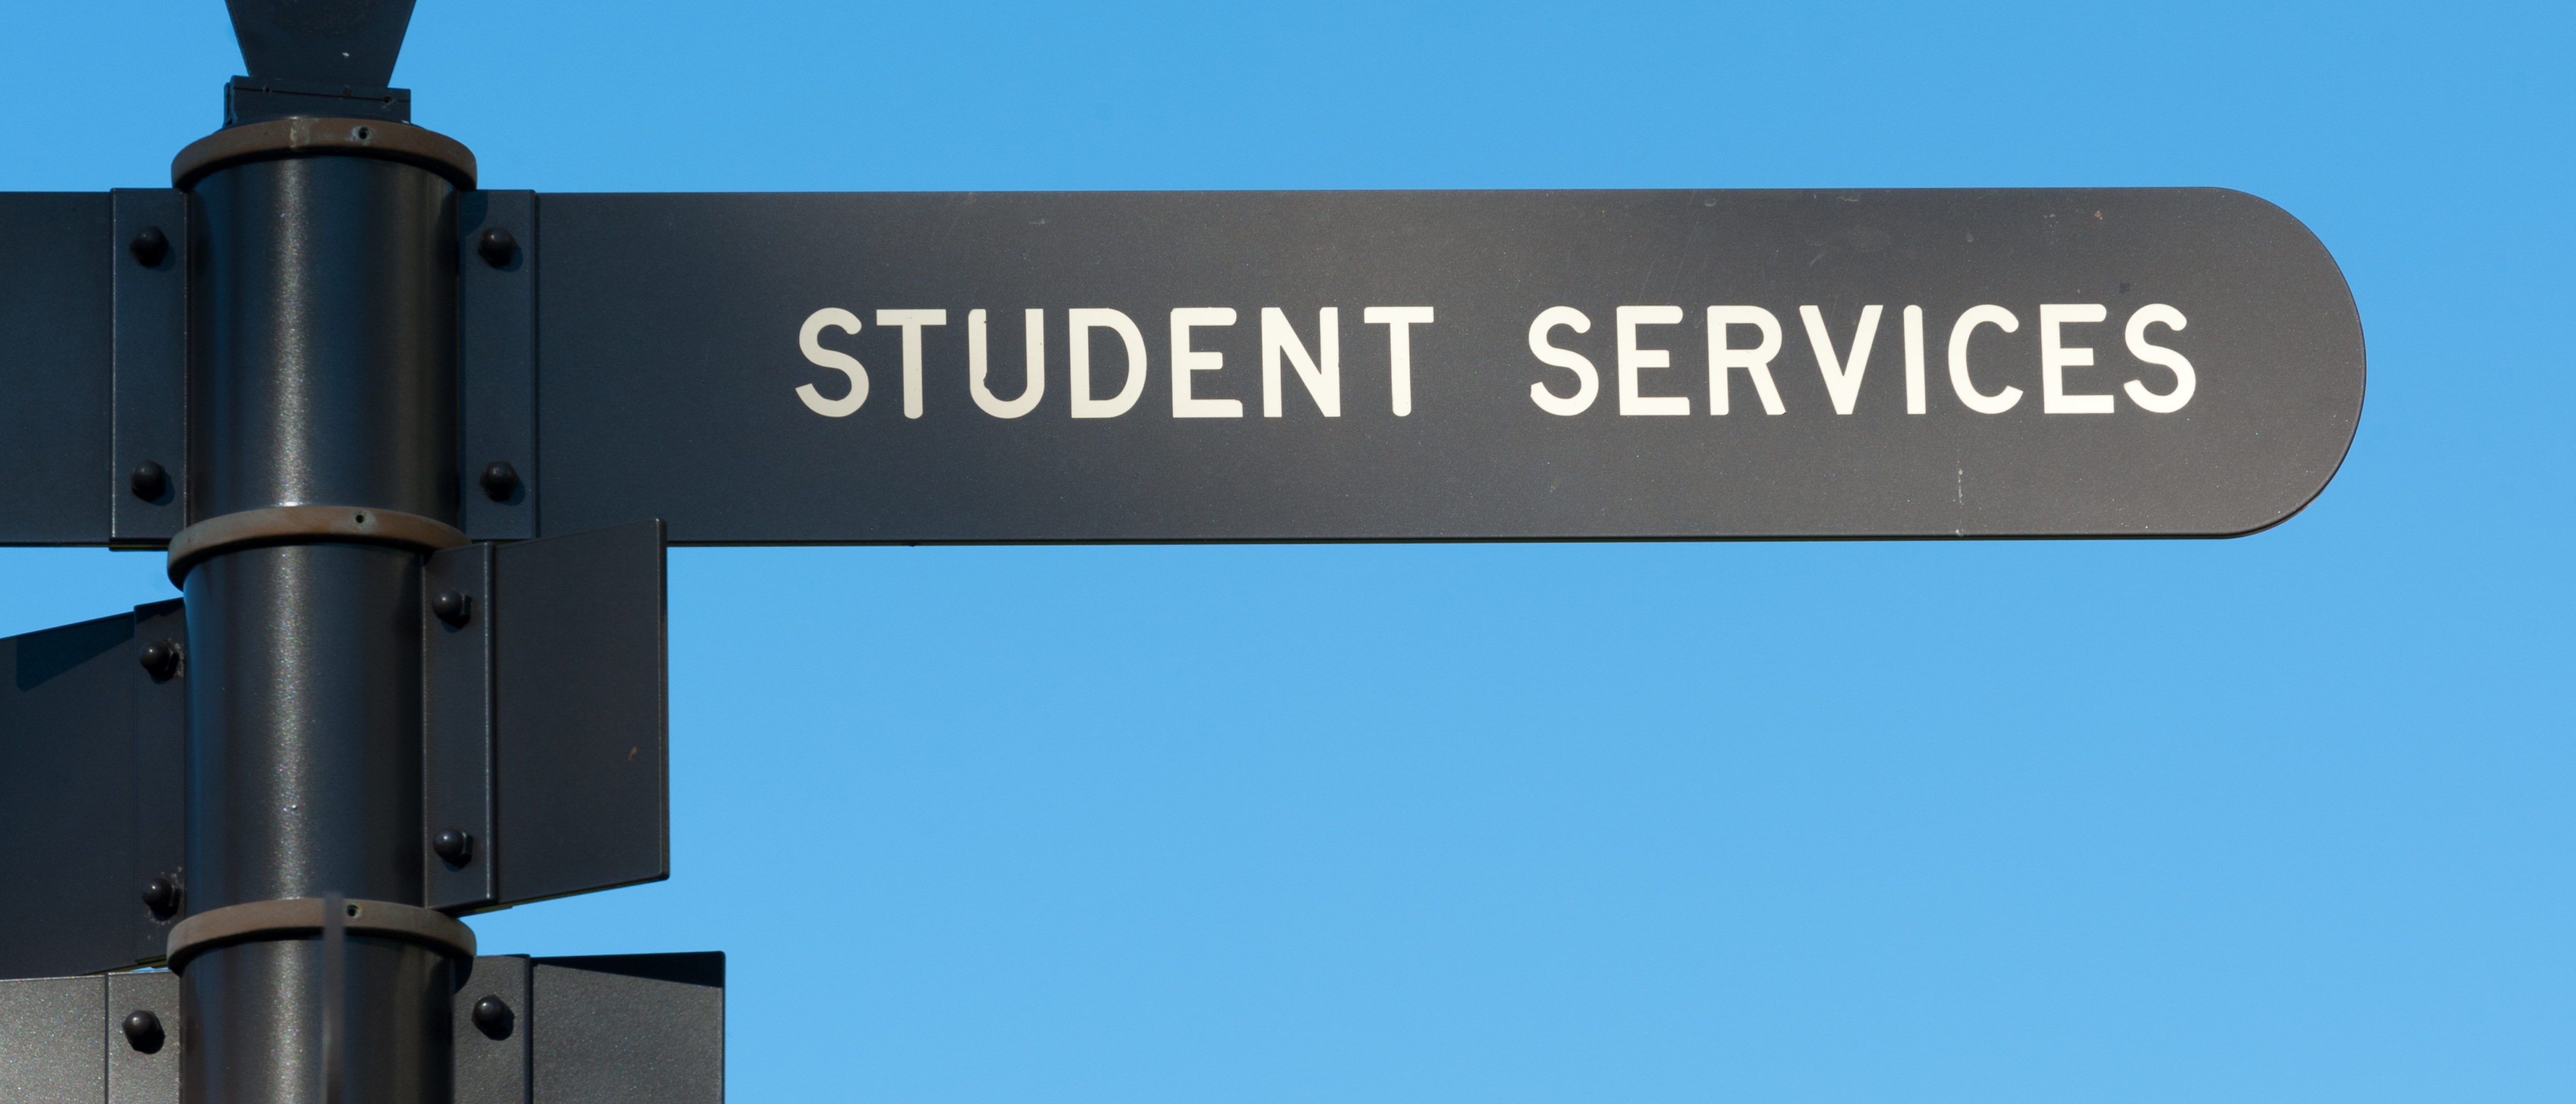 Student services banner